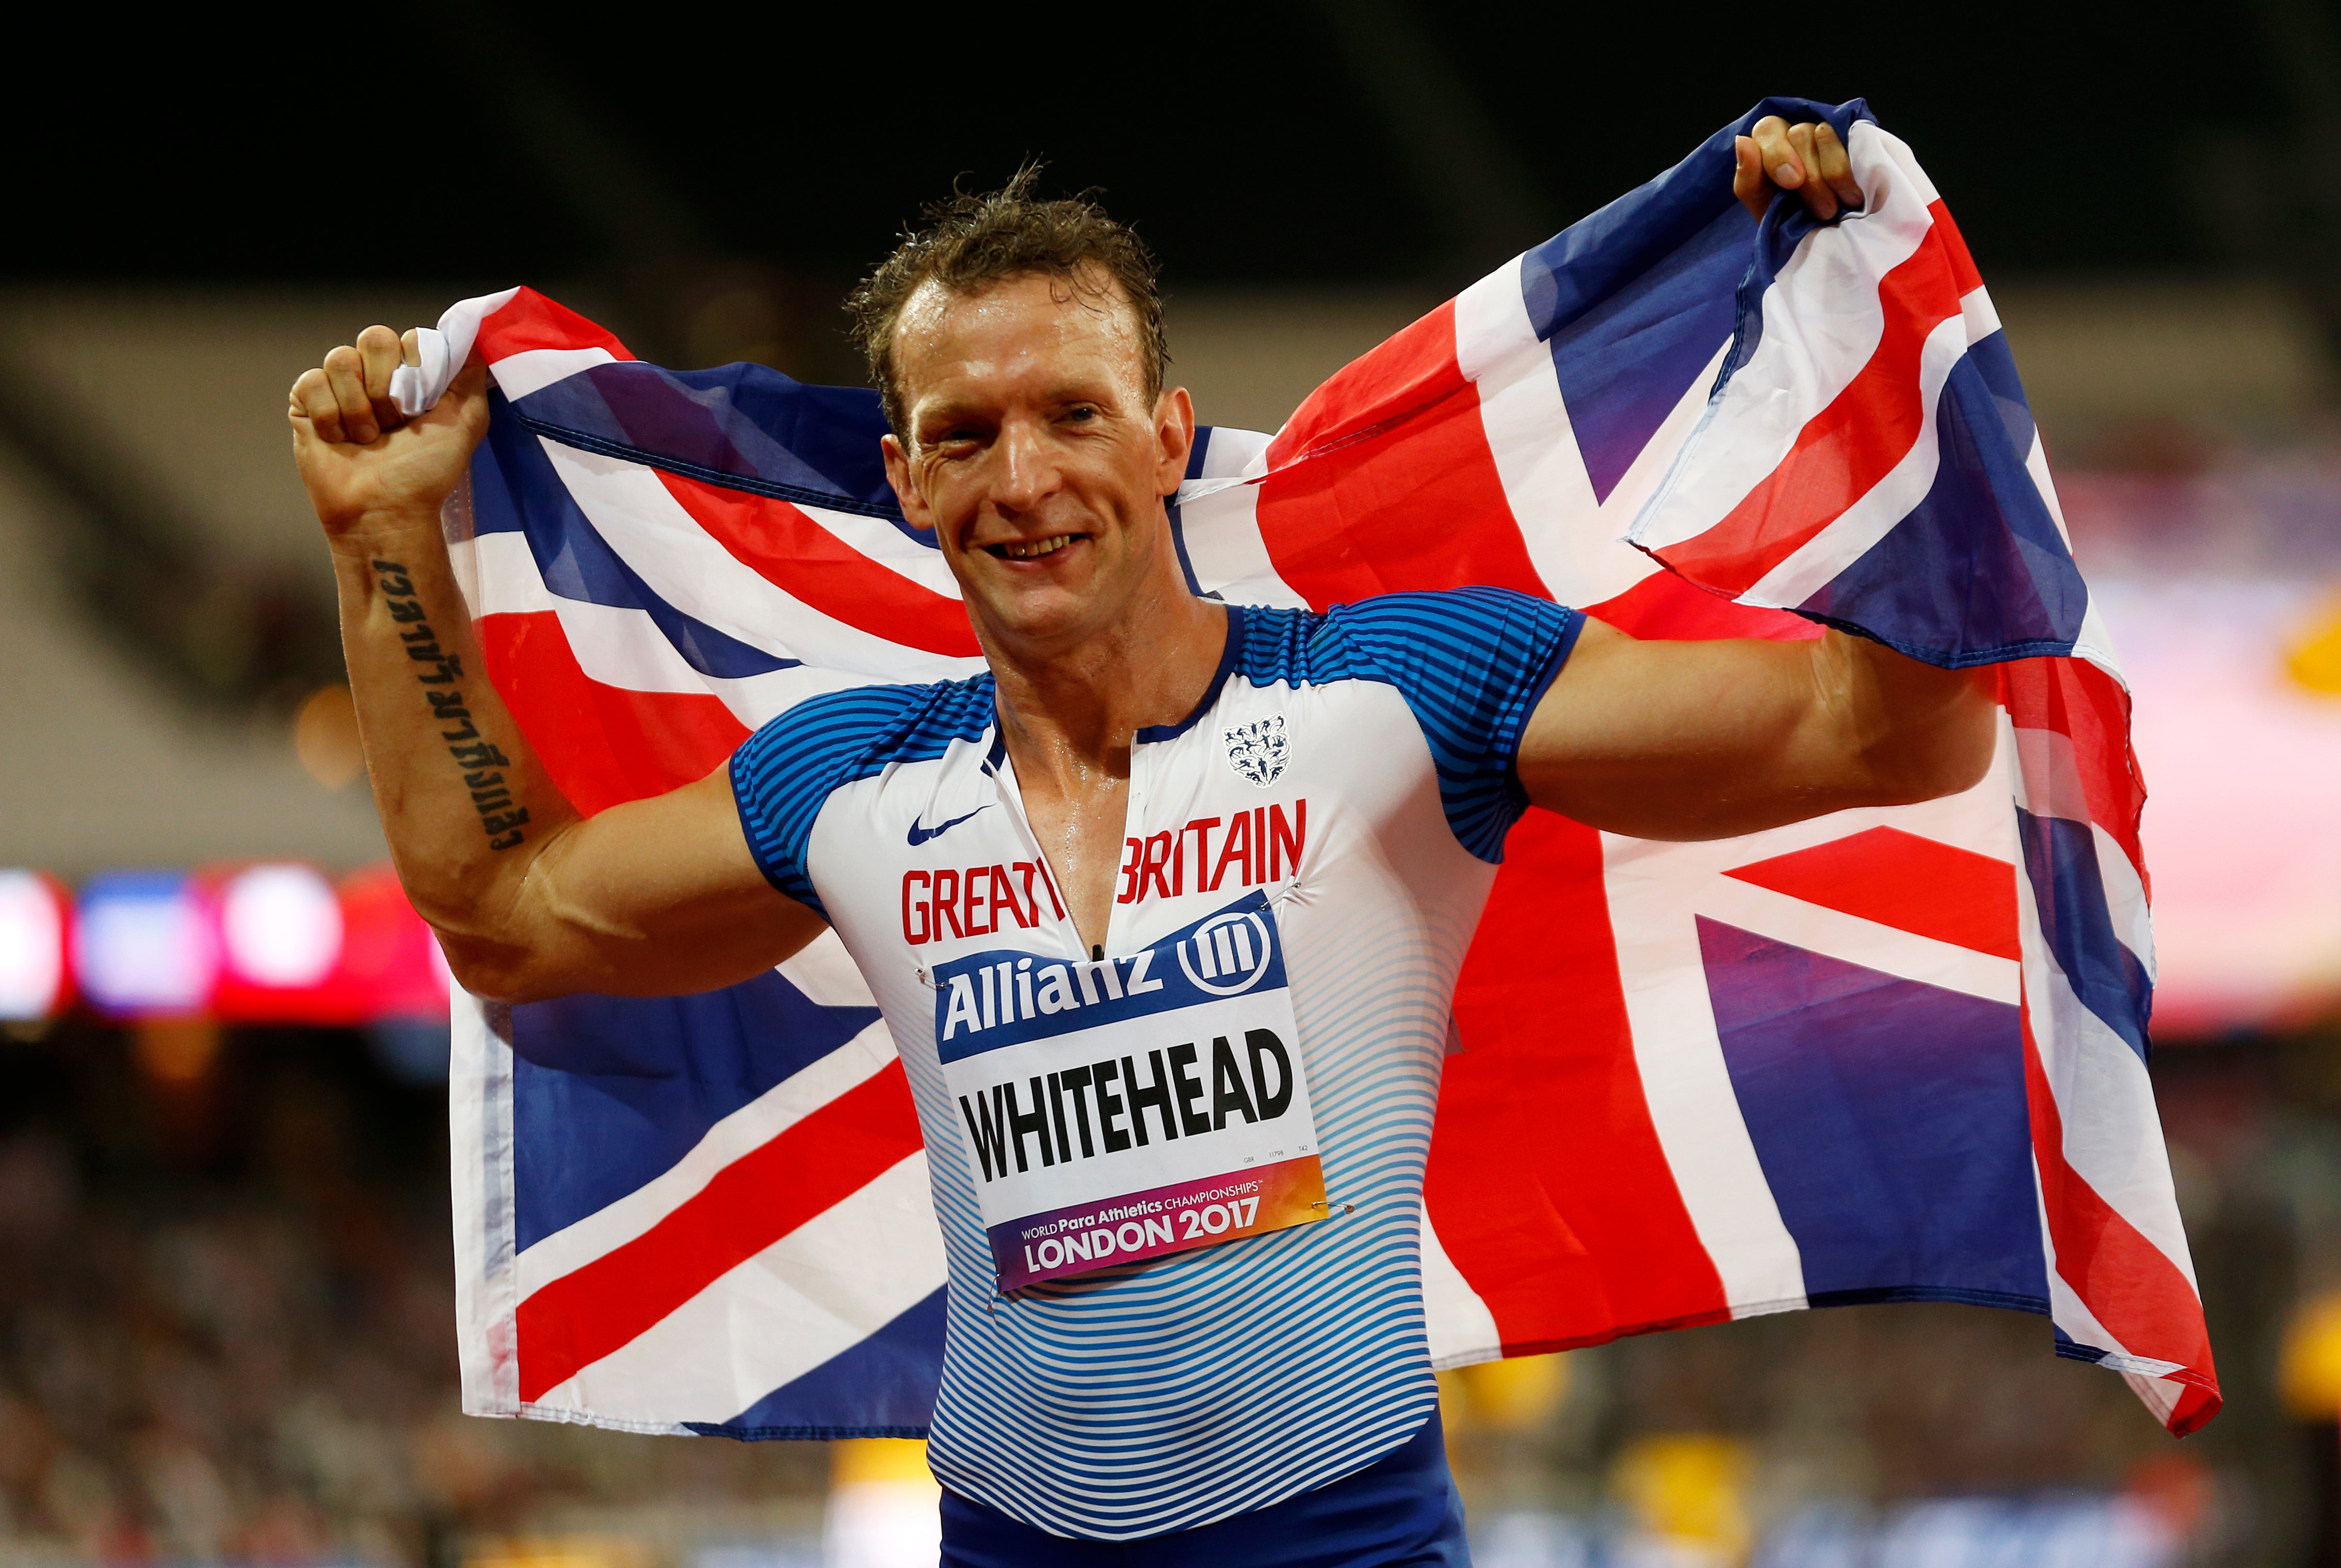 Great Britain’s Richard Whitehead could continue his Paralympic odyssey as far as Paris 2024 (Paul Harding/PA)